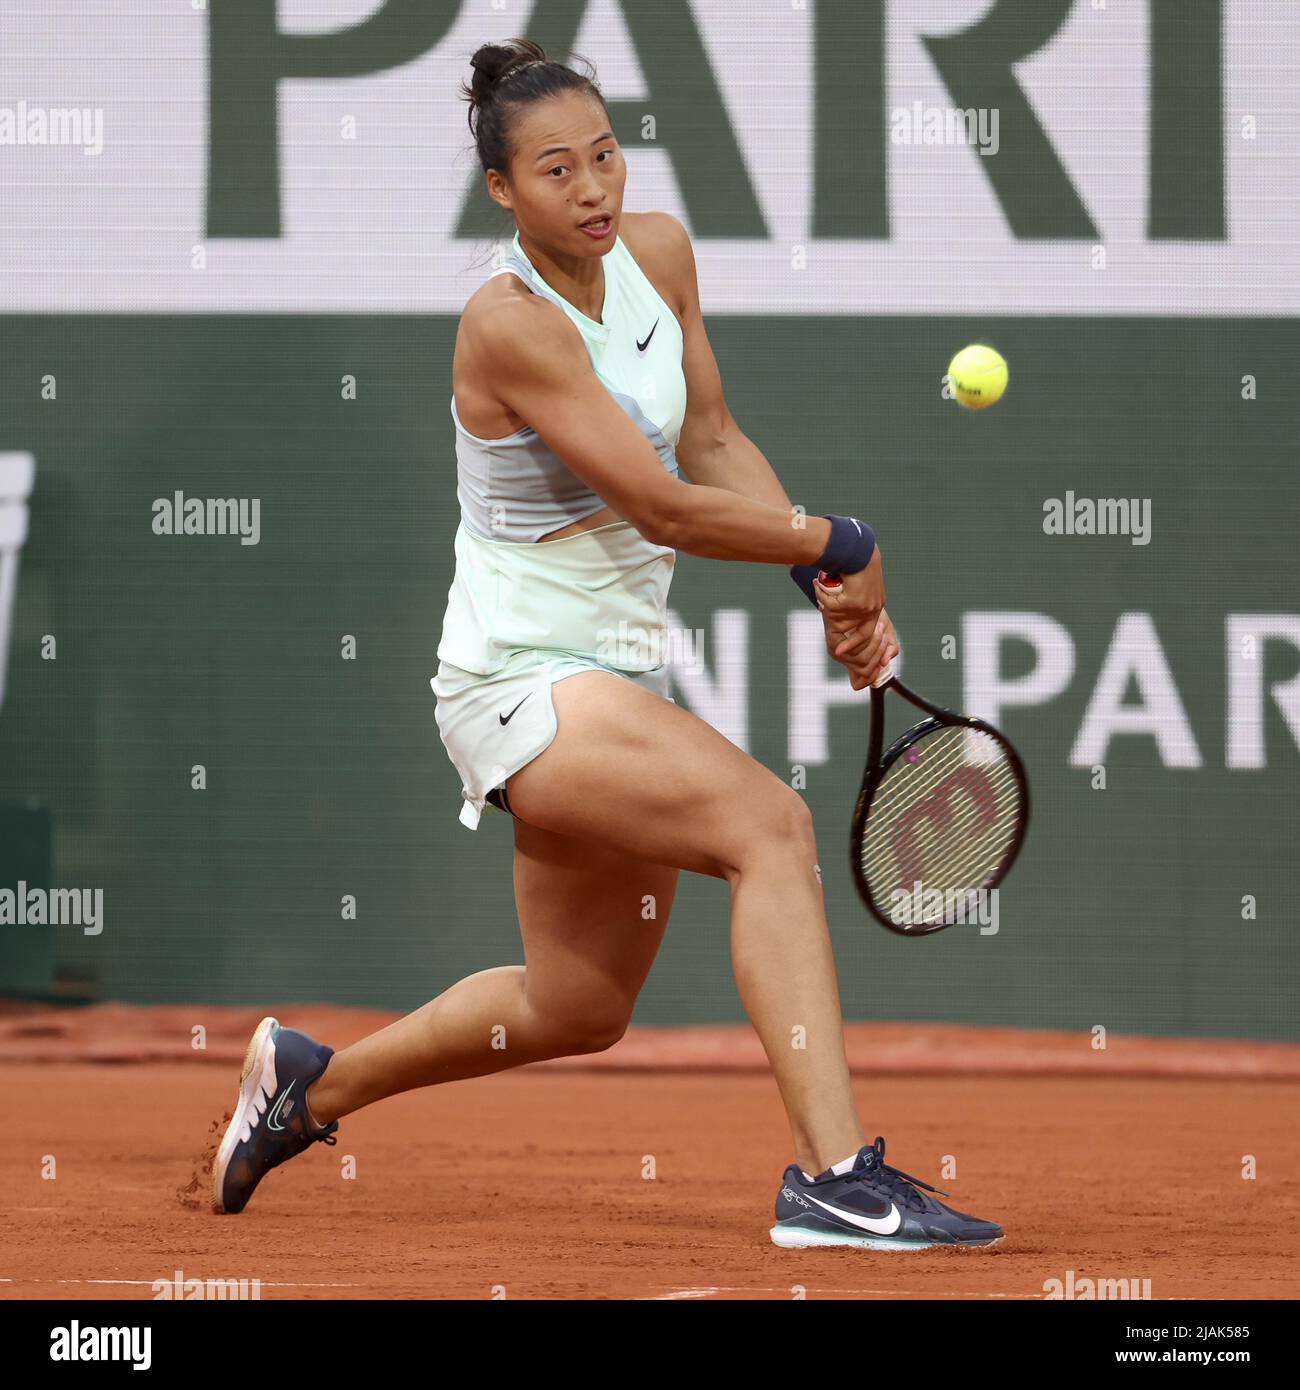 Paris, France - May 30, 2022, Zheng Qinwen of China during day 9 of  Roland-Garros 2022, French Open 2022, second Grand Slam tennis tournament  of the season on May 30, 2022 at